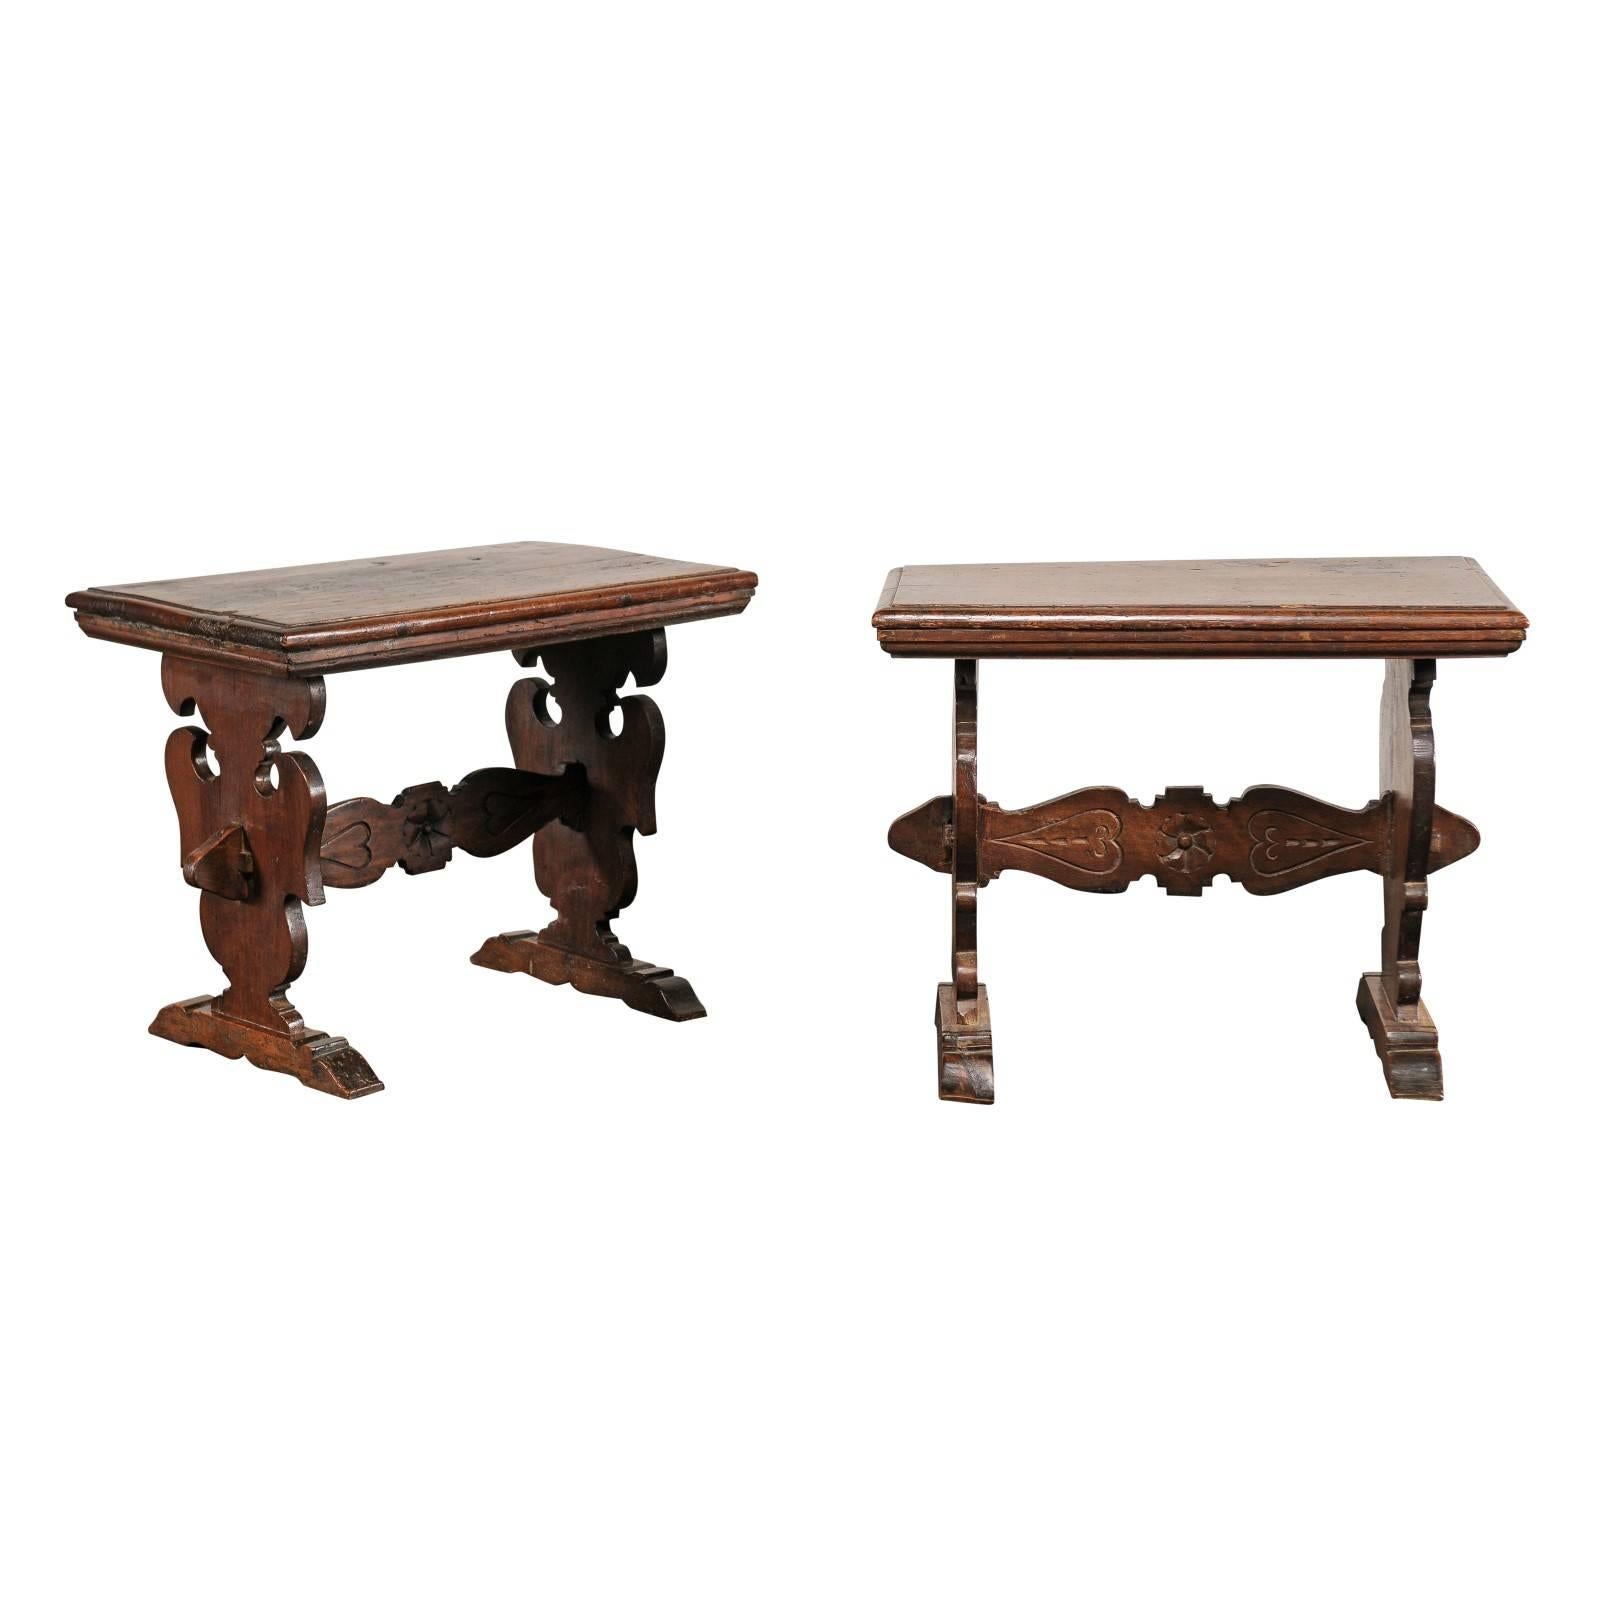 Pair of 20th Century Walnut Continental Side Tables on Carved Trestle Leg Base